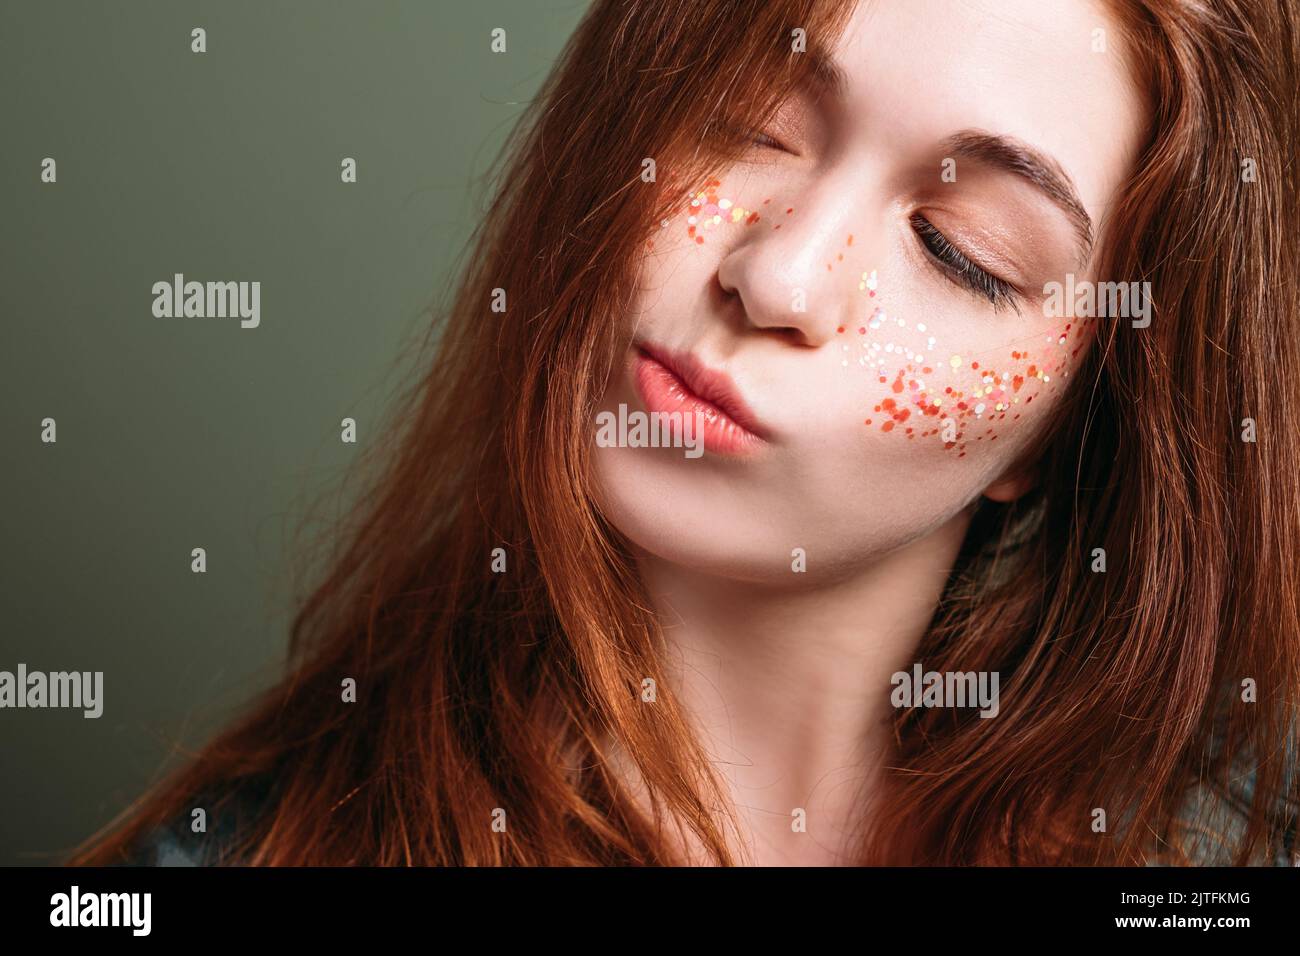 young woman skeptical facial expression pout lips Stock Photo